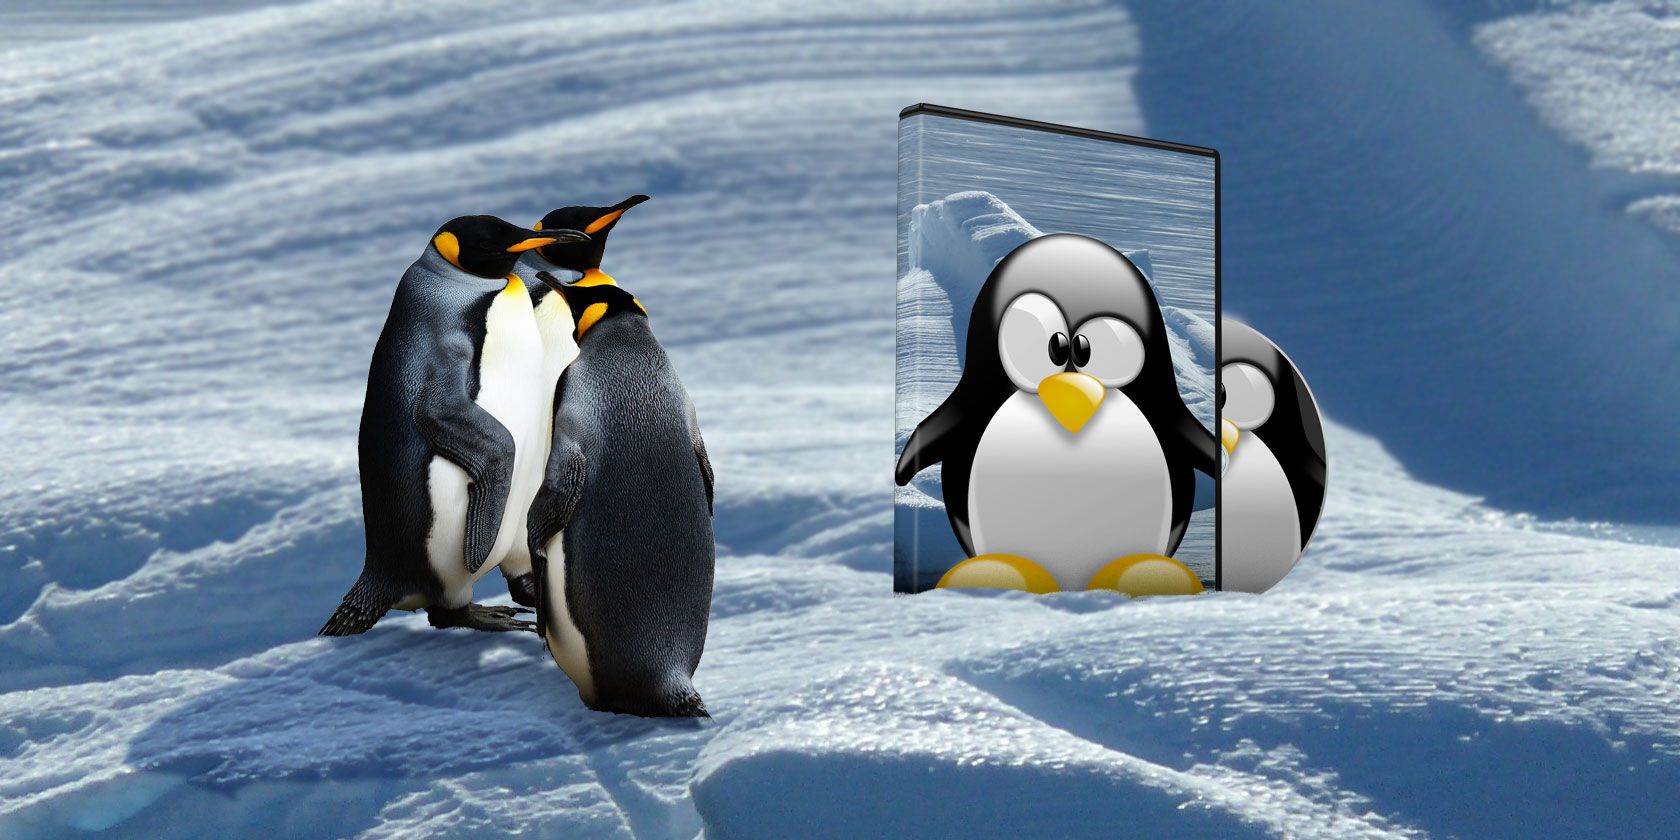 penguins in front of a mirror on ice